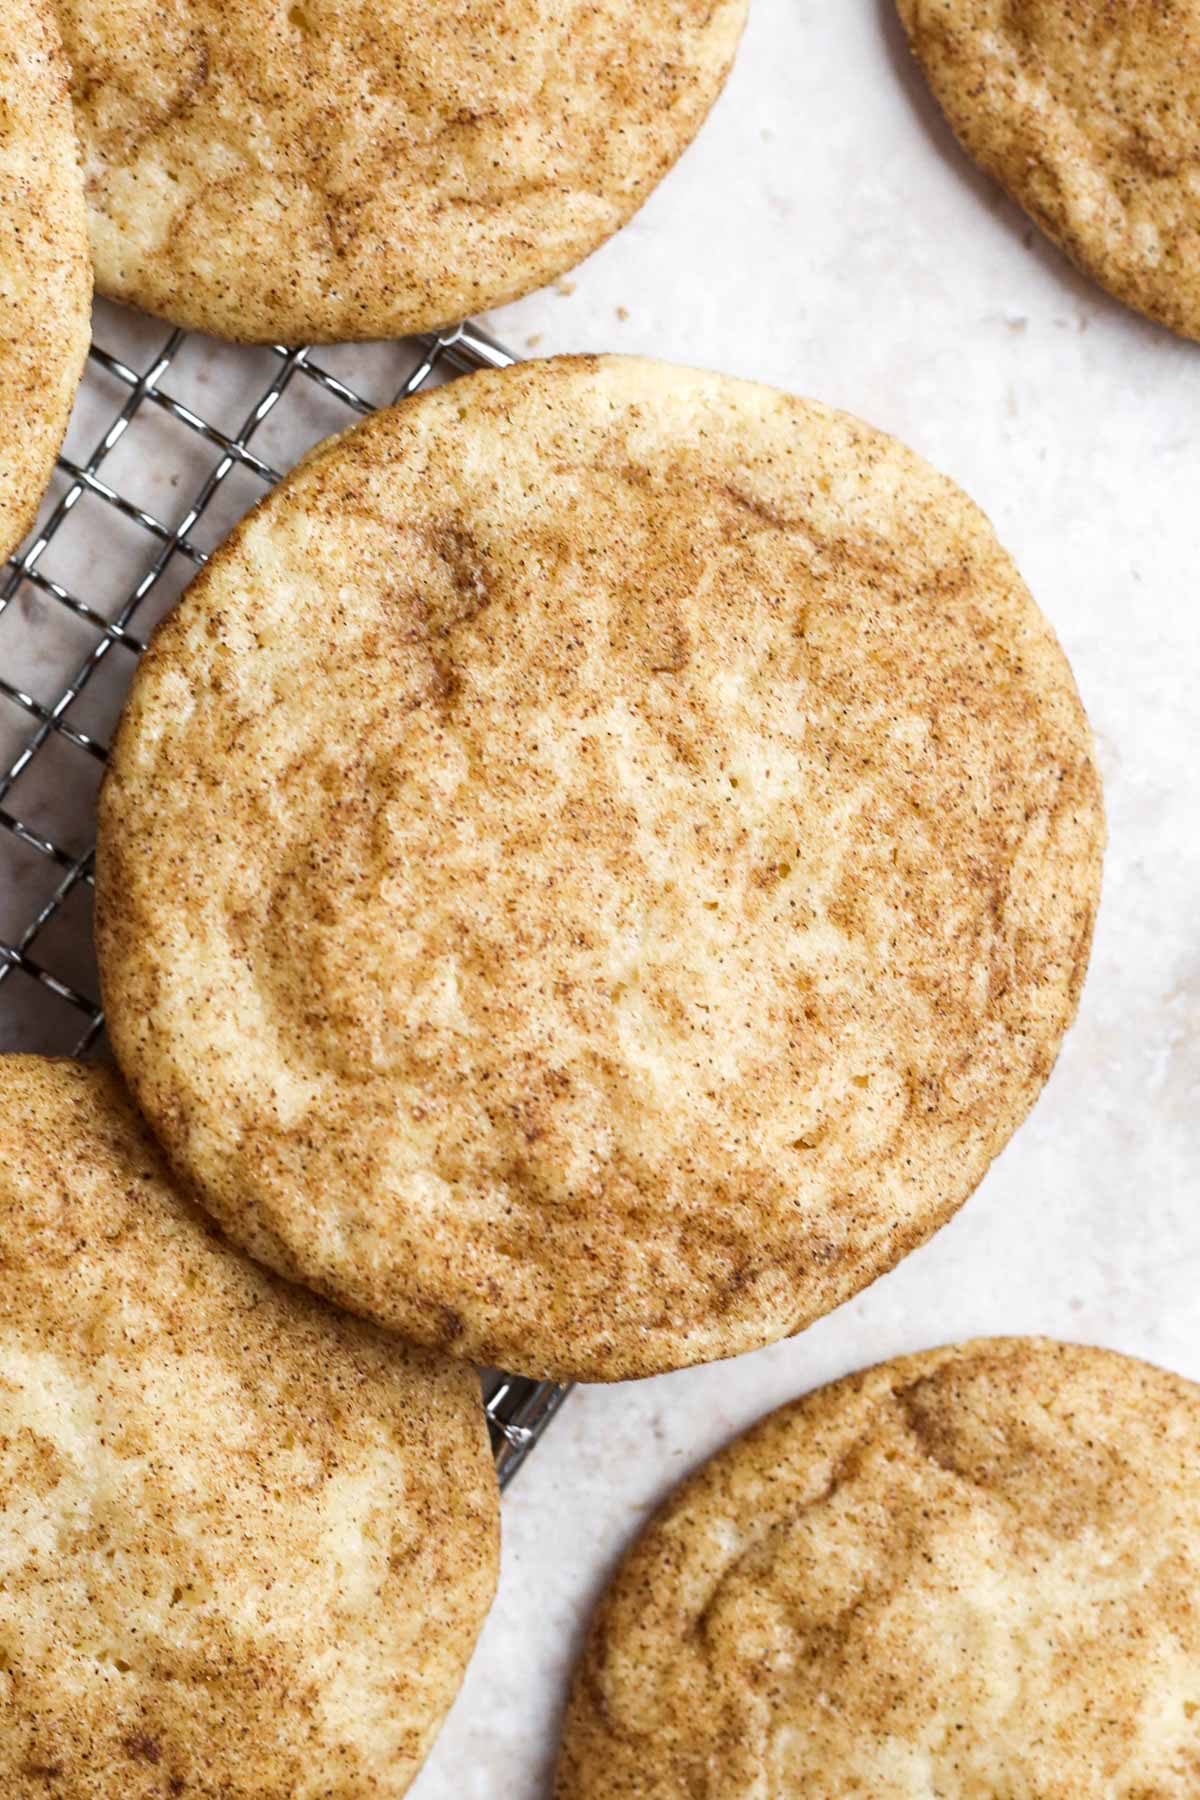 close up of the top of a baked snickerdoodle cookie without cream of tartar, showing the cinnamon sugar coating.